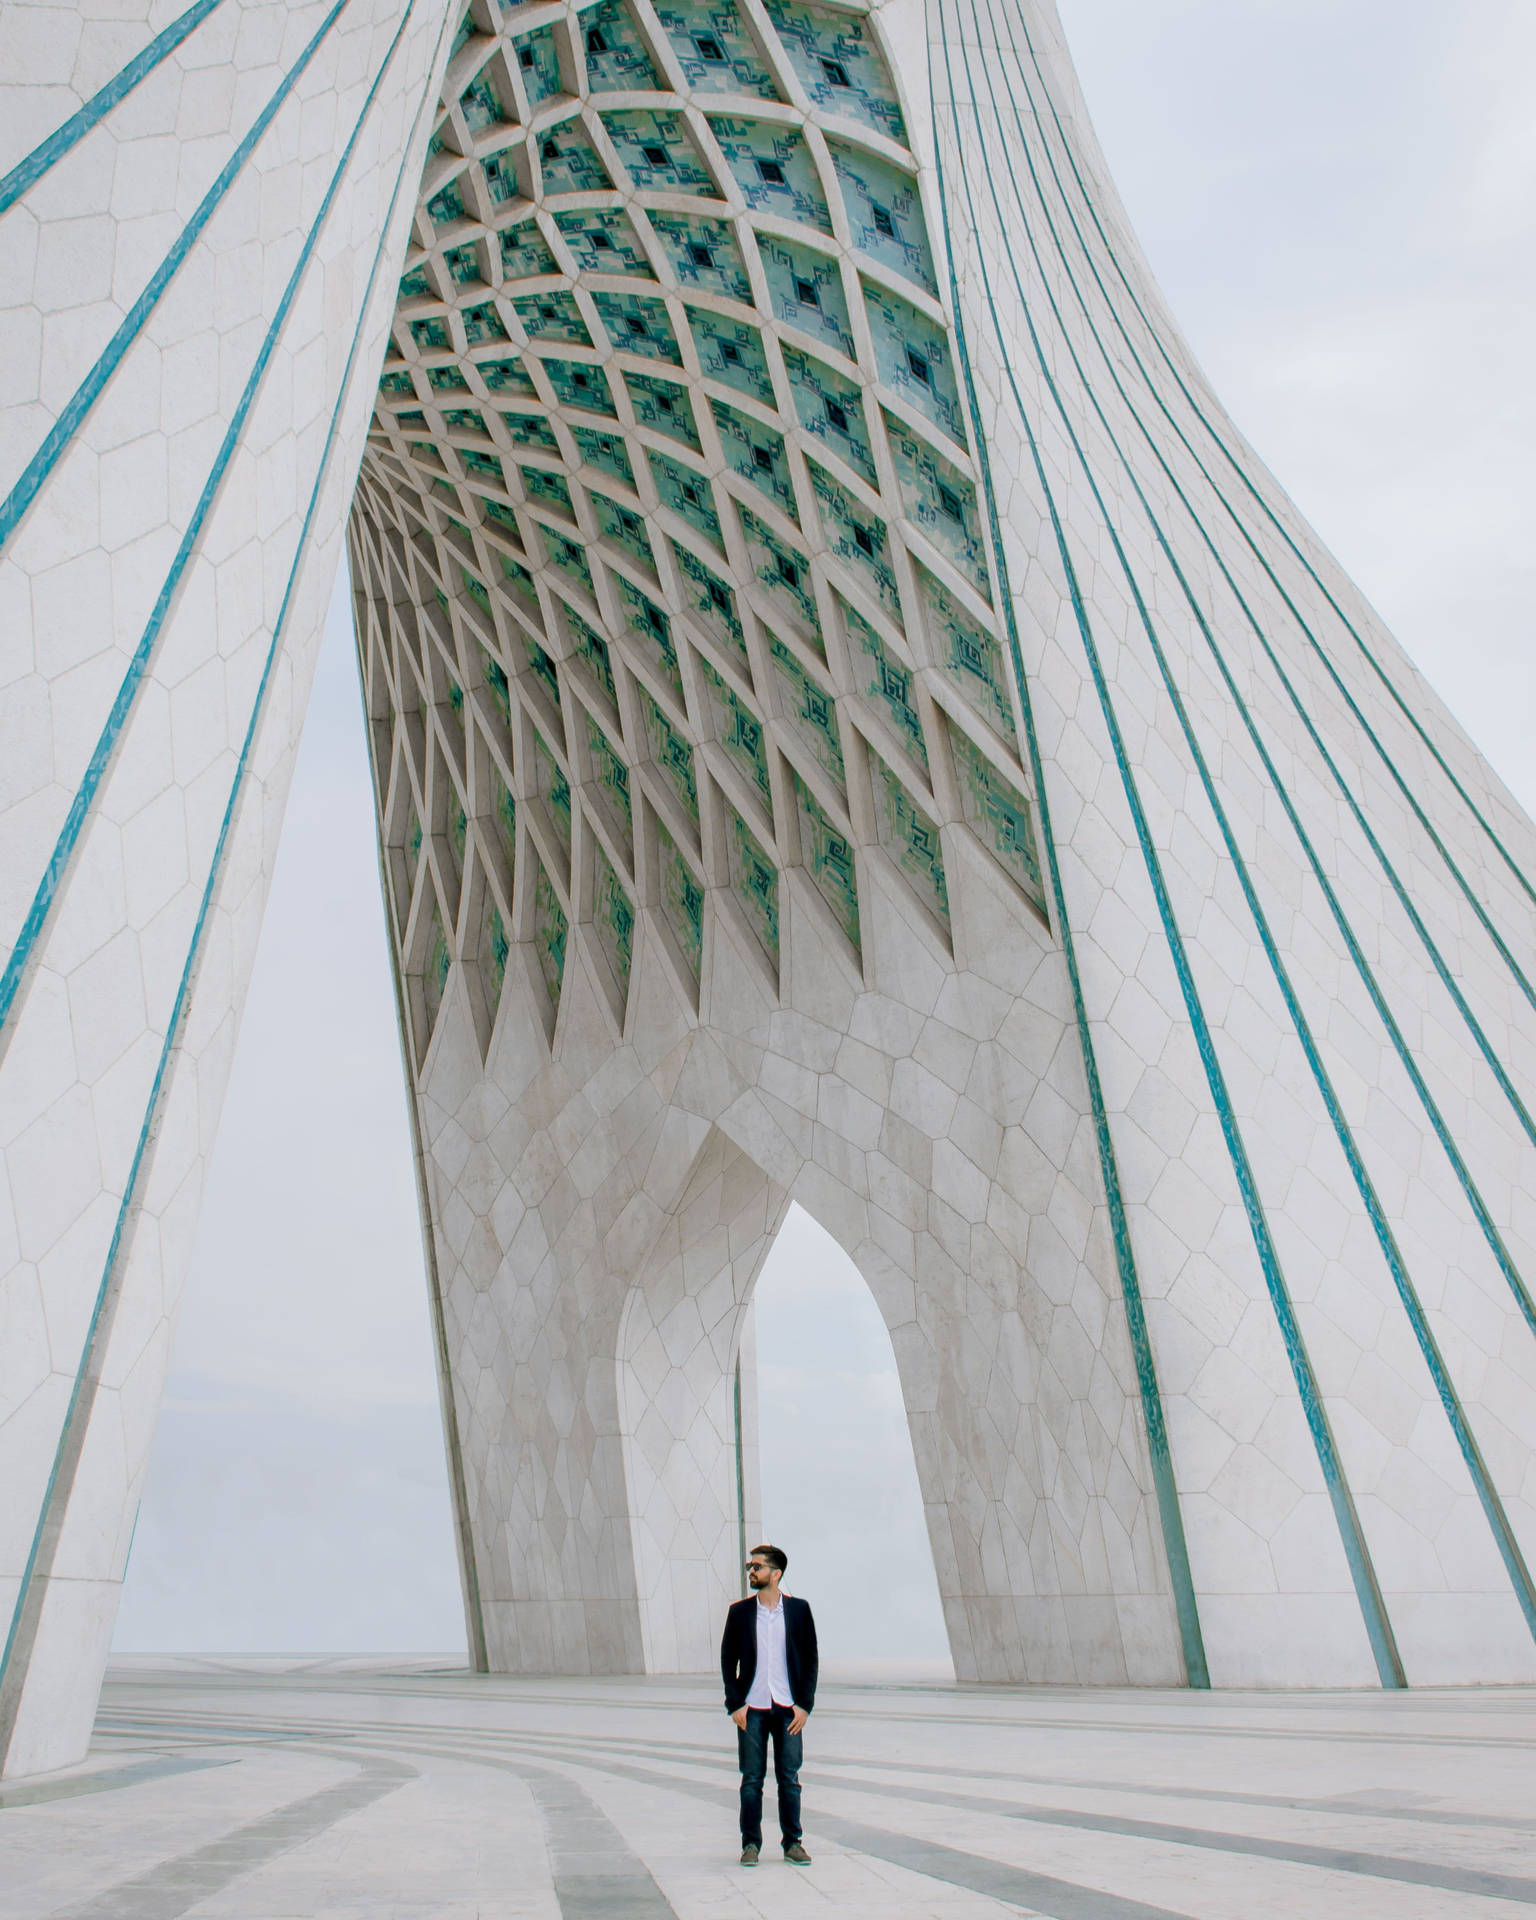 Caption: Man Standing In Front Of The Azadi Tower In Tehran, Iran Background